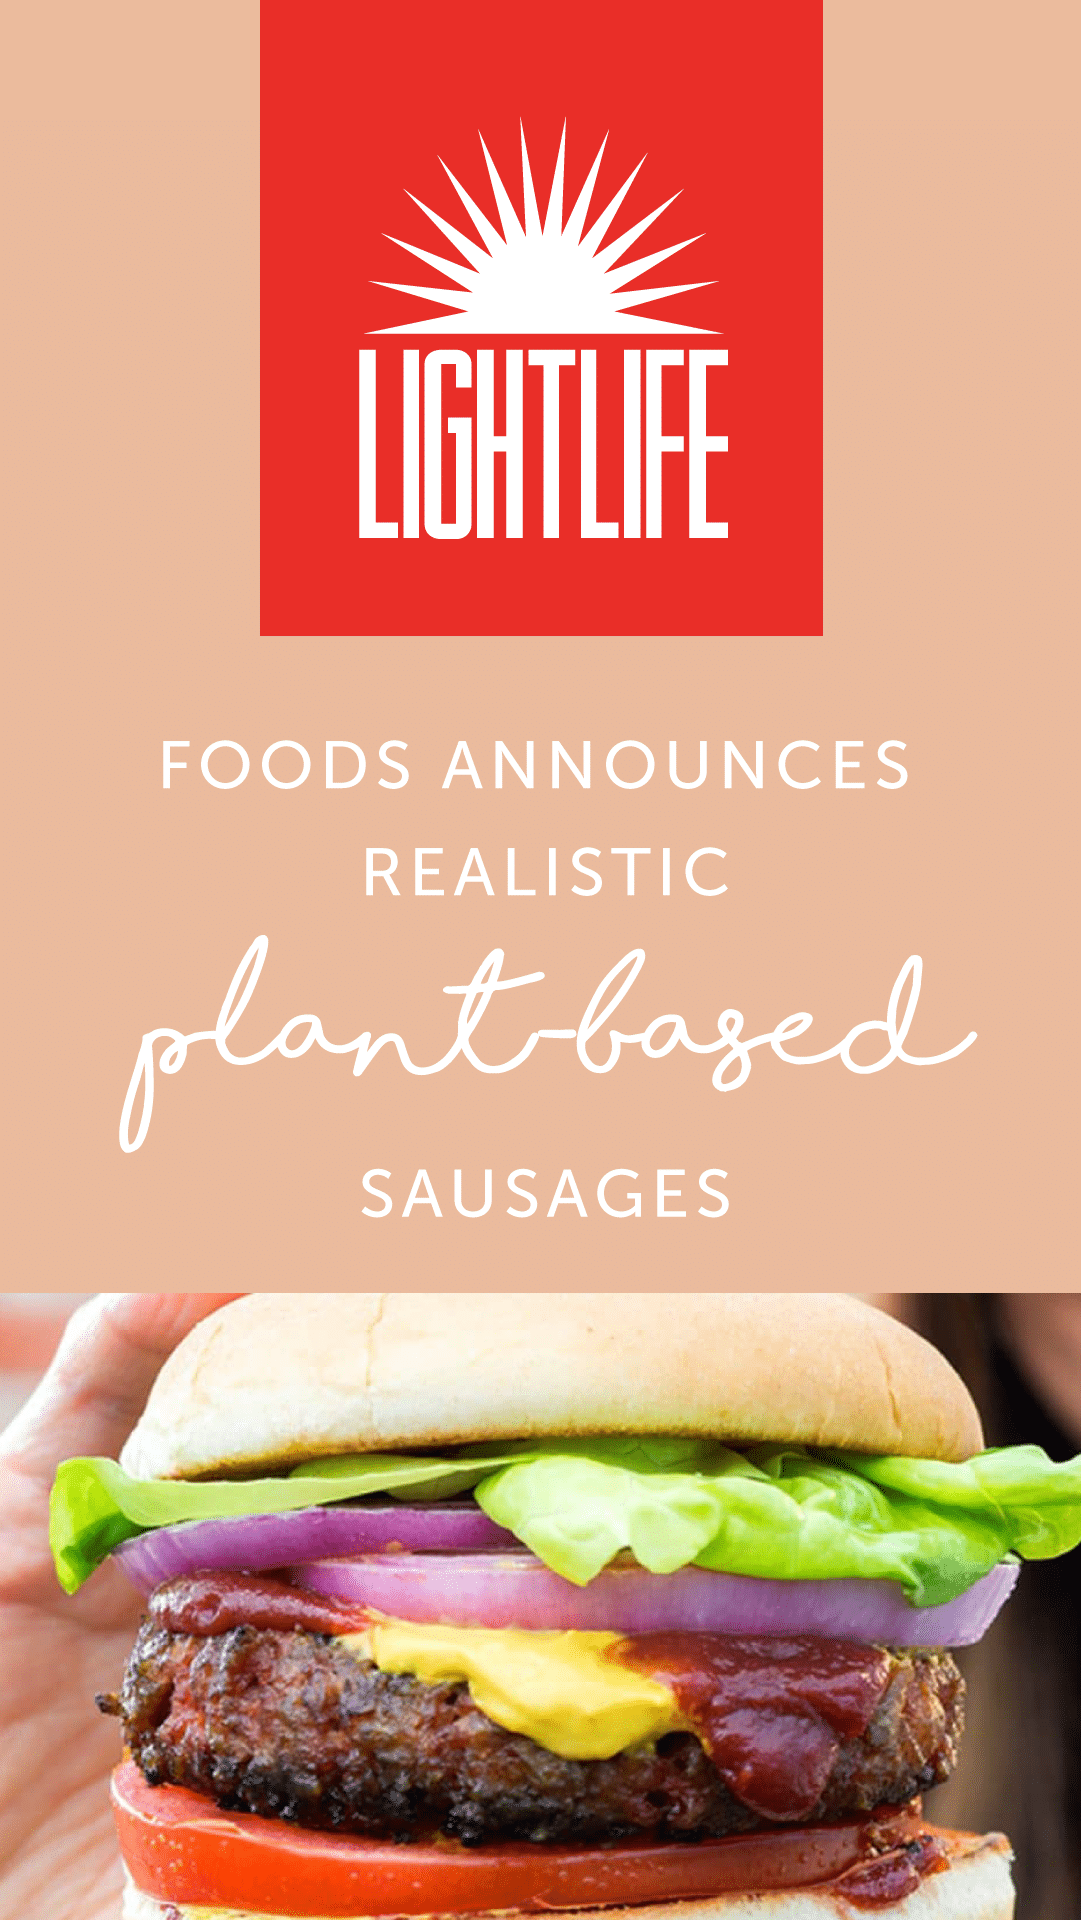 Lightlife Foods Announces Realistic Plant-Based Sausages